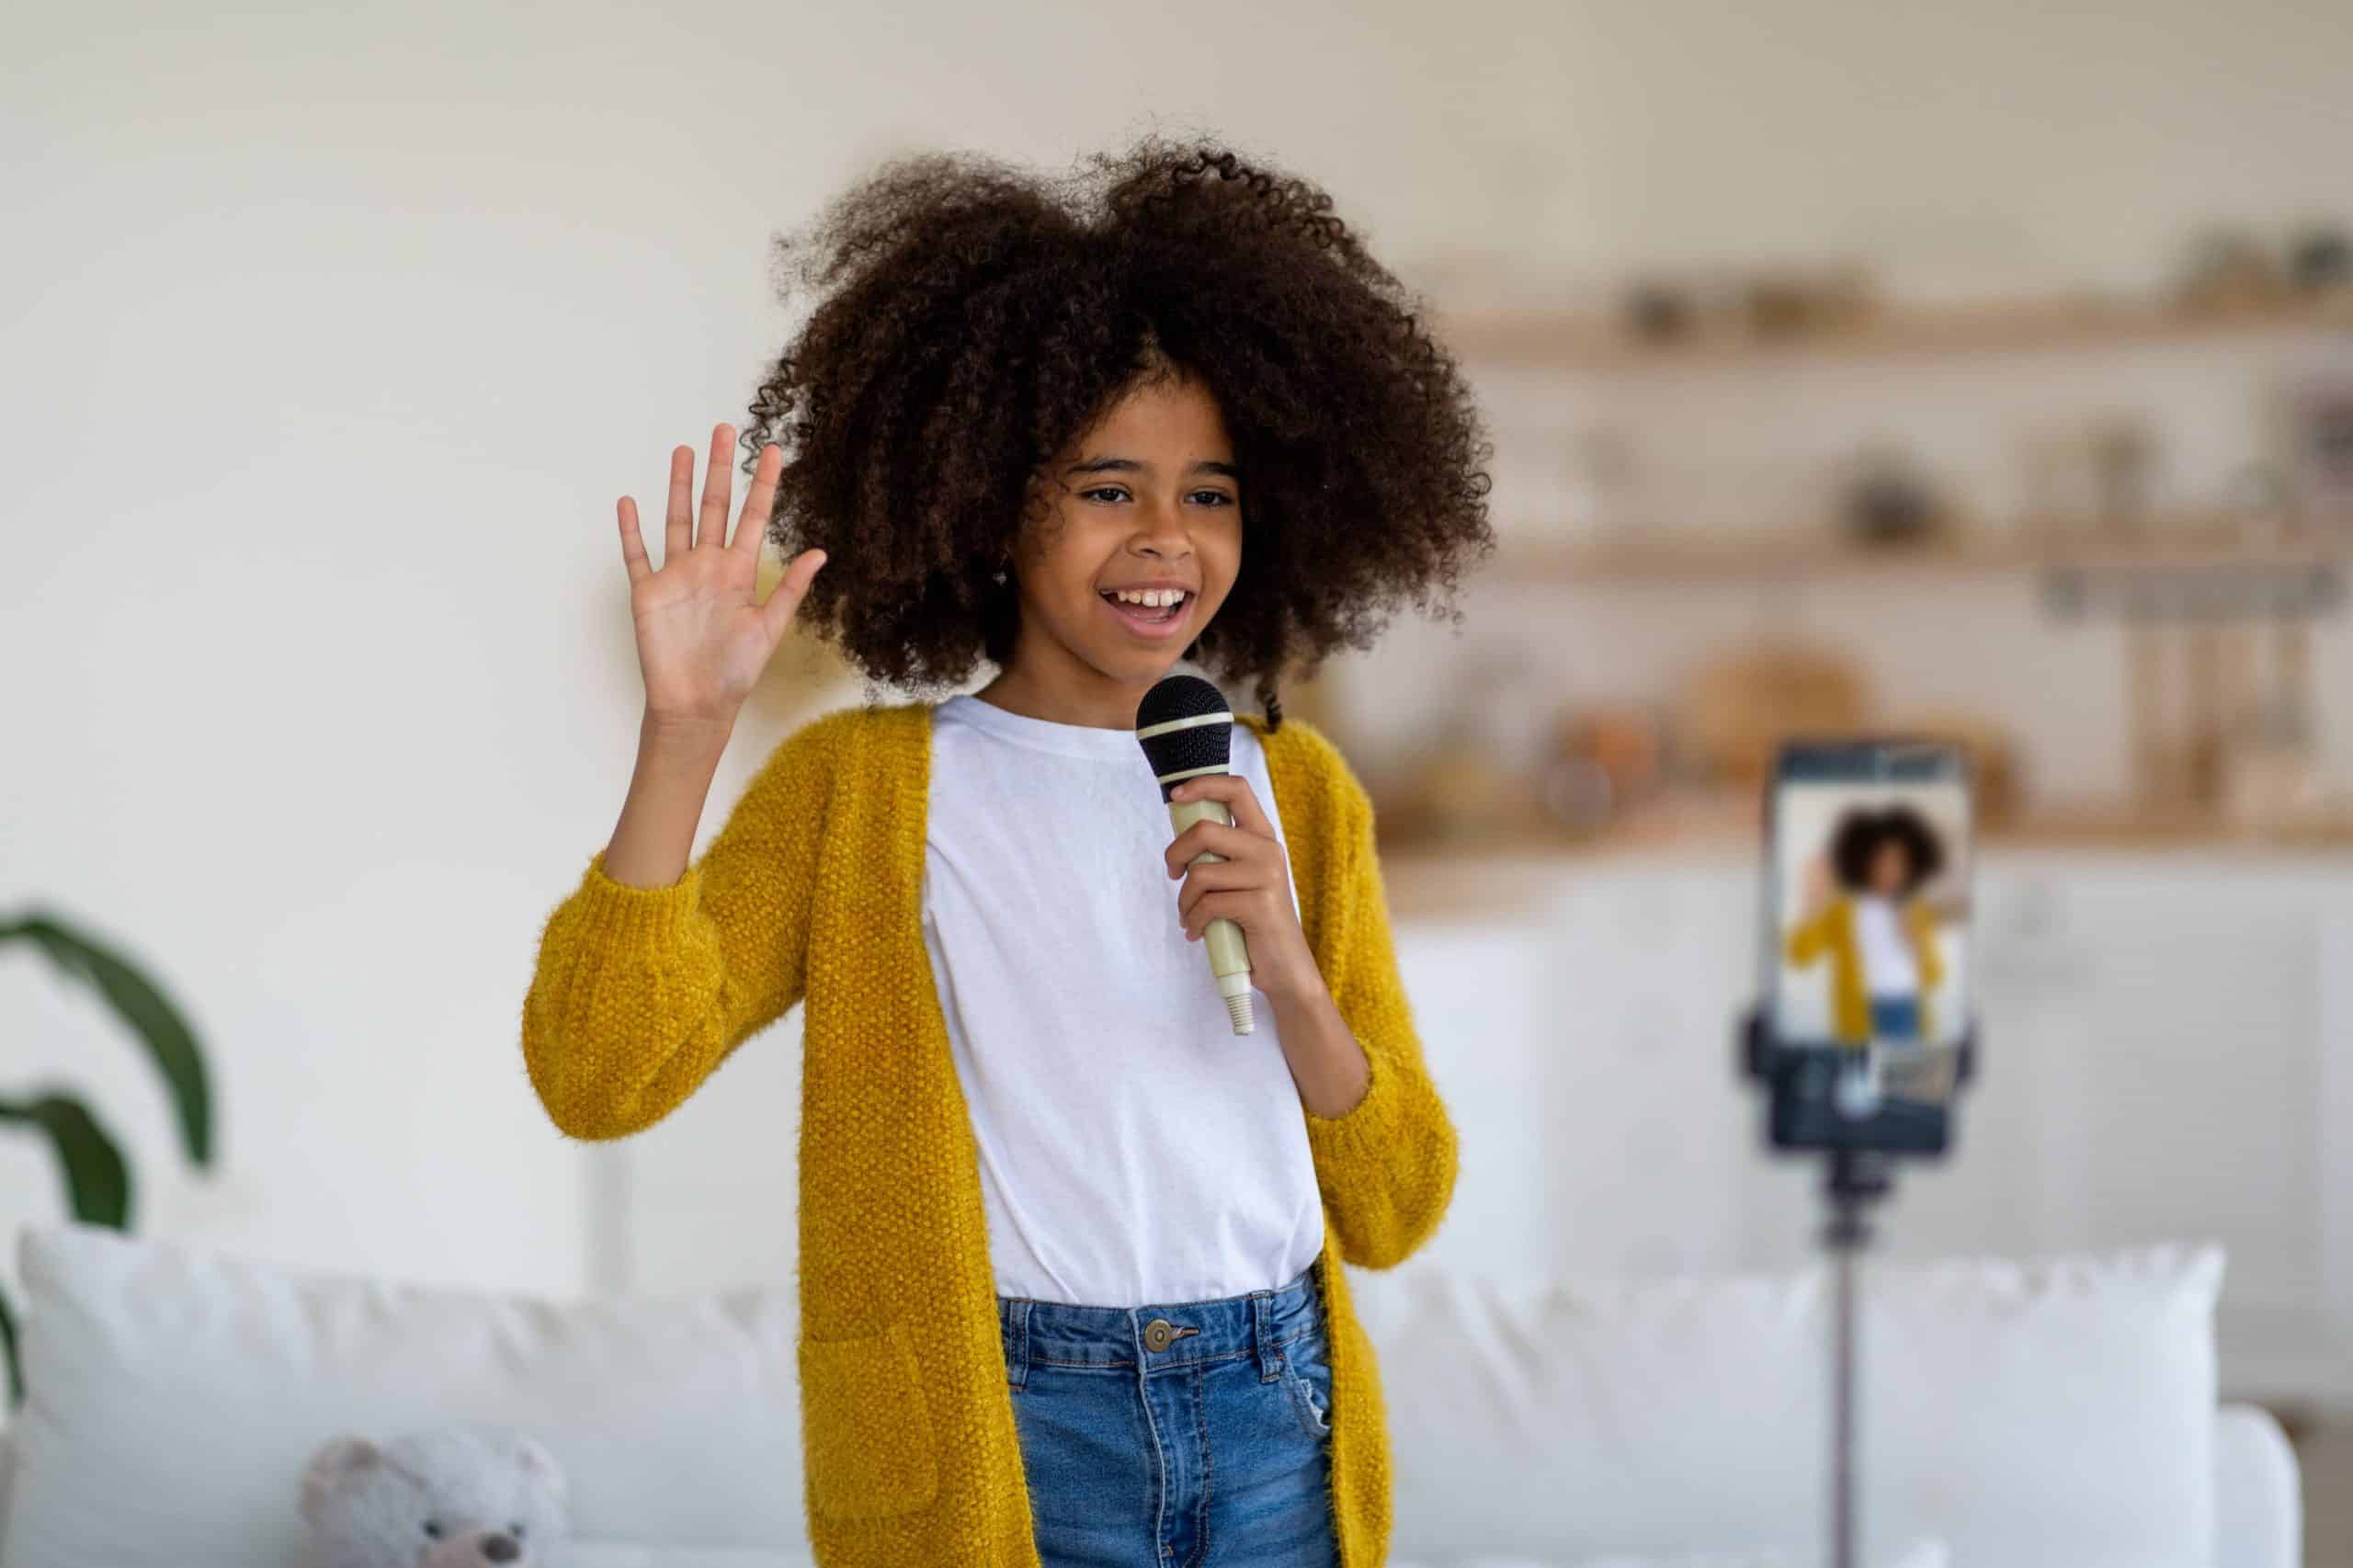 The challenges your child may face during their singing career